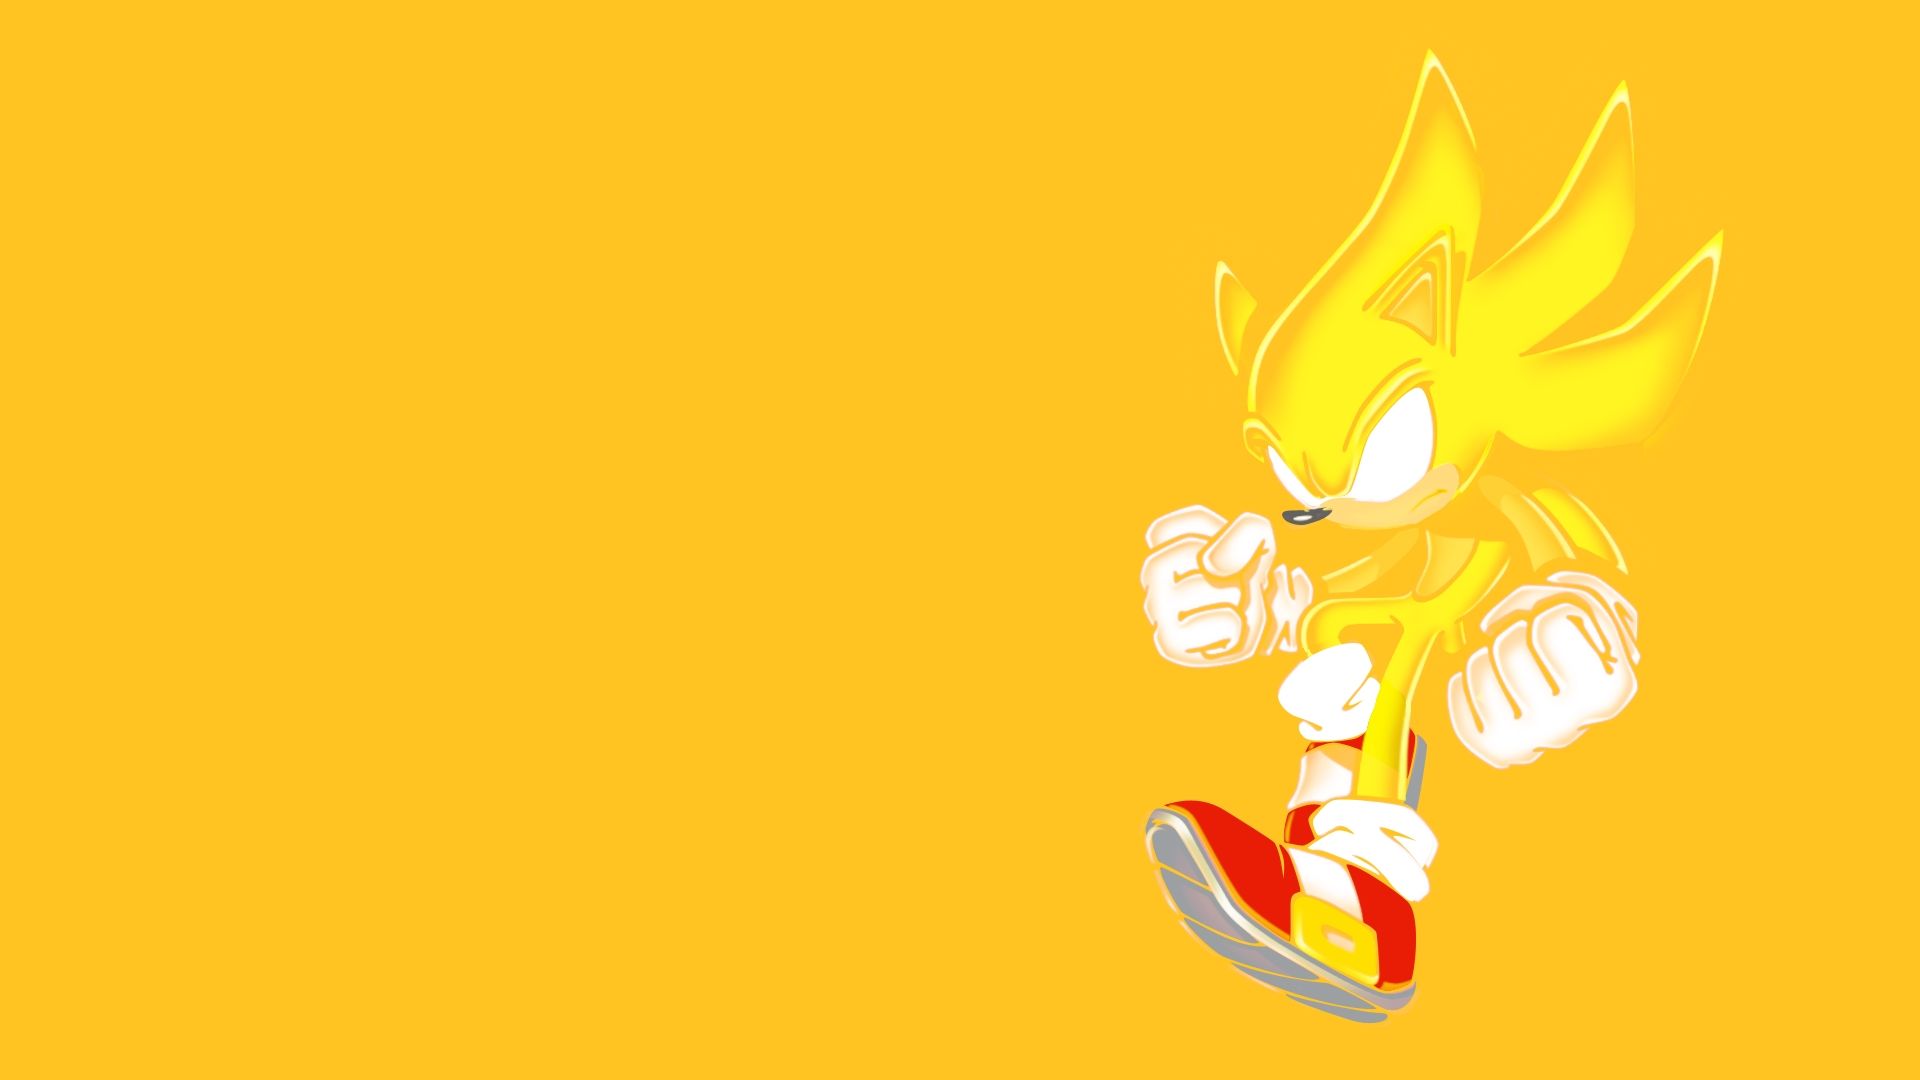 Free download Sonic Sonic the Hedgehog Yellow wallpaper background [1920x1080] for your Desktop, Mobile & Tablet. Explore Sonic The Hedgehog Background. Sonic The Hedgehog Wallpaper, Sonic Hedgehog Wallpaper, Wallpaper Sonic Hedgehog